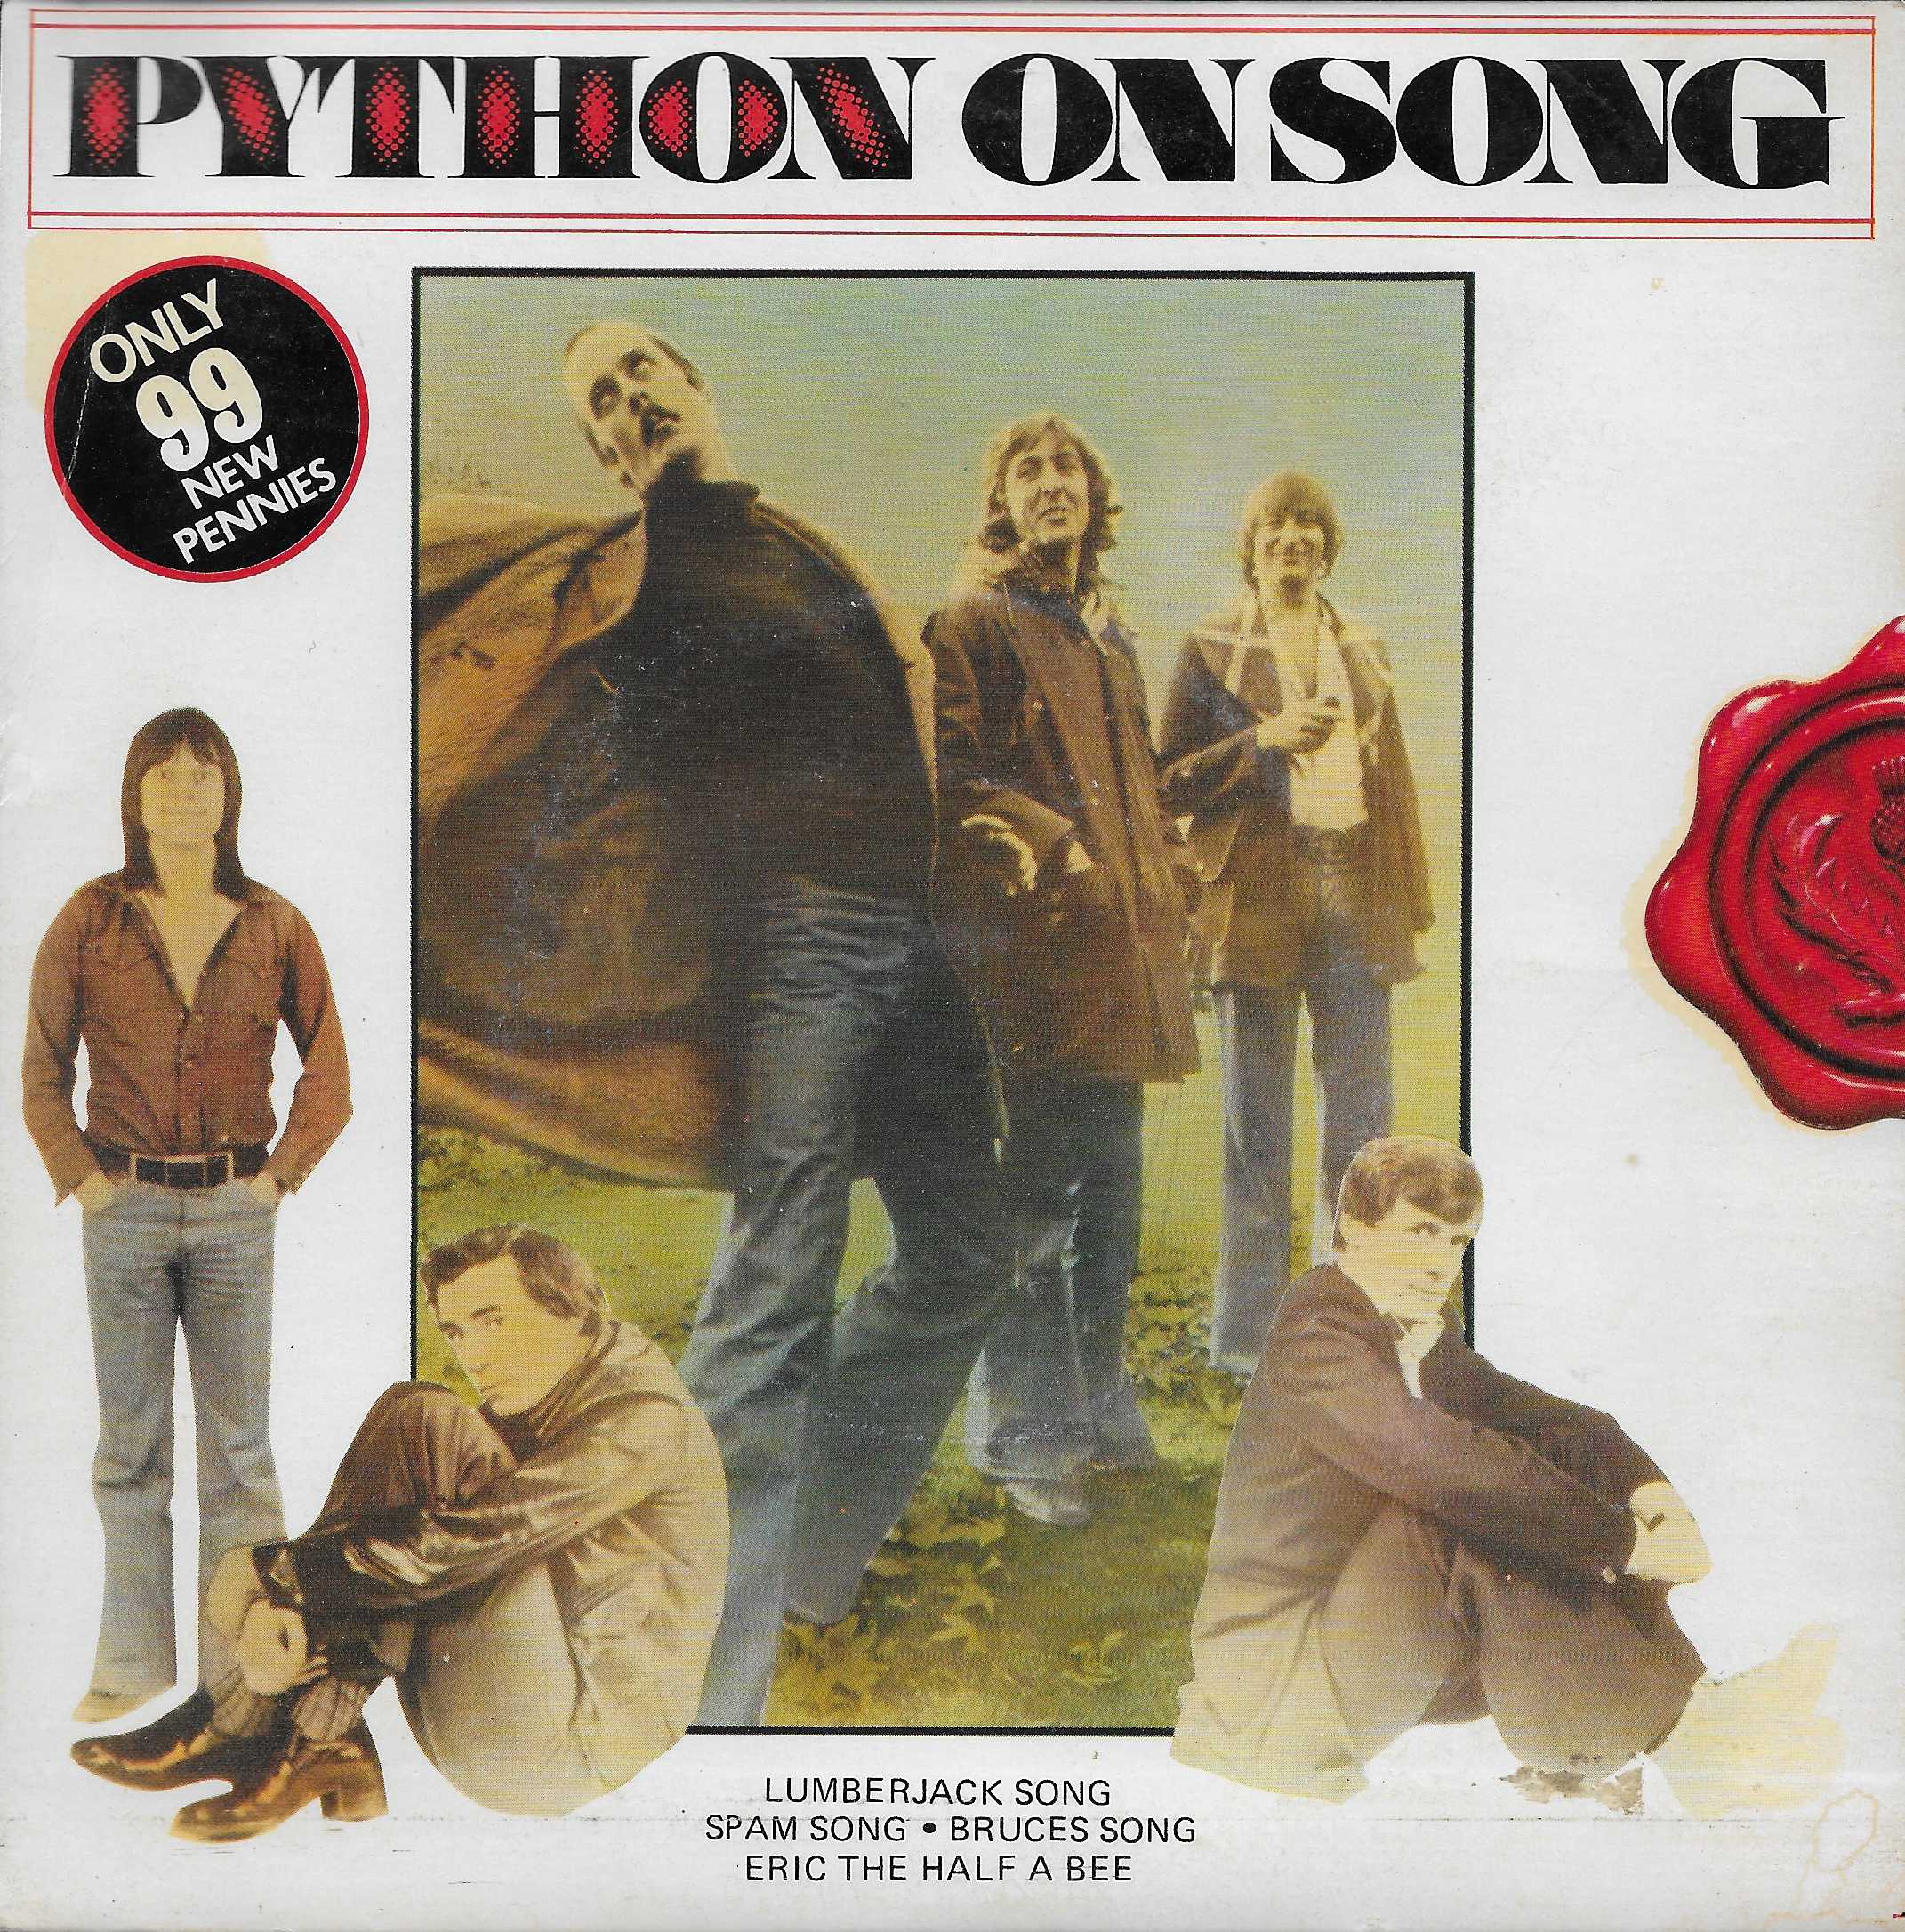 Picture of Python on song (Monty Python's flying circus) by artist Monty Python from the BBC singles - Records and Tapes library